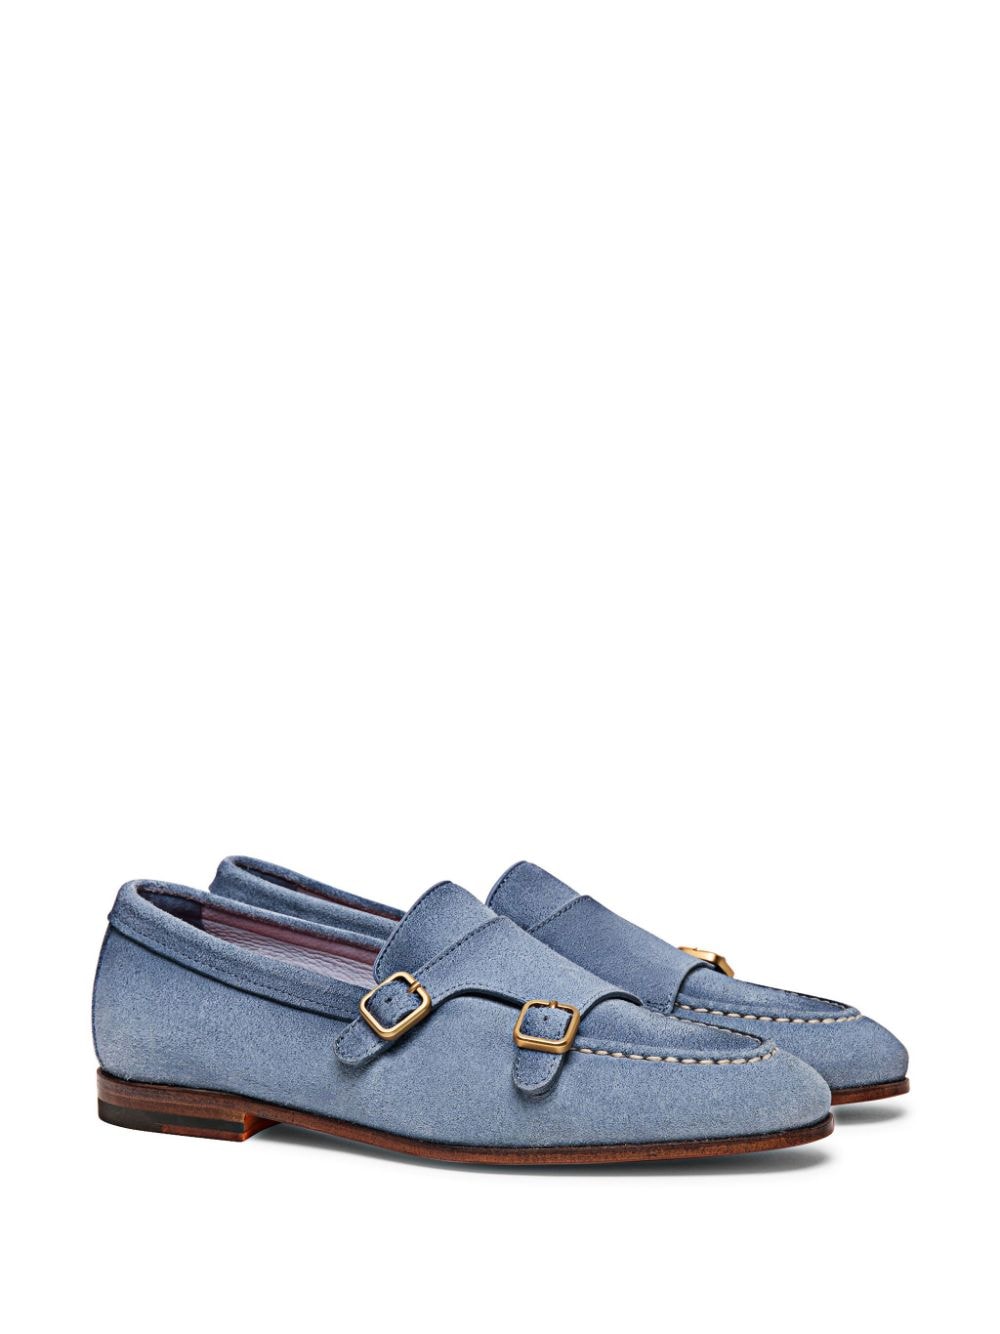 Santoni double-buckled suede loafers - Blauw